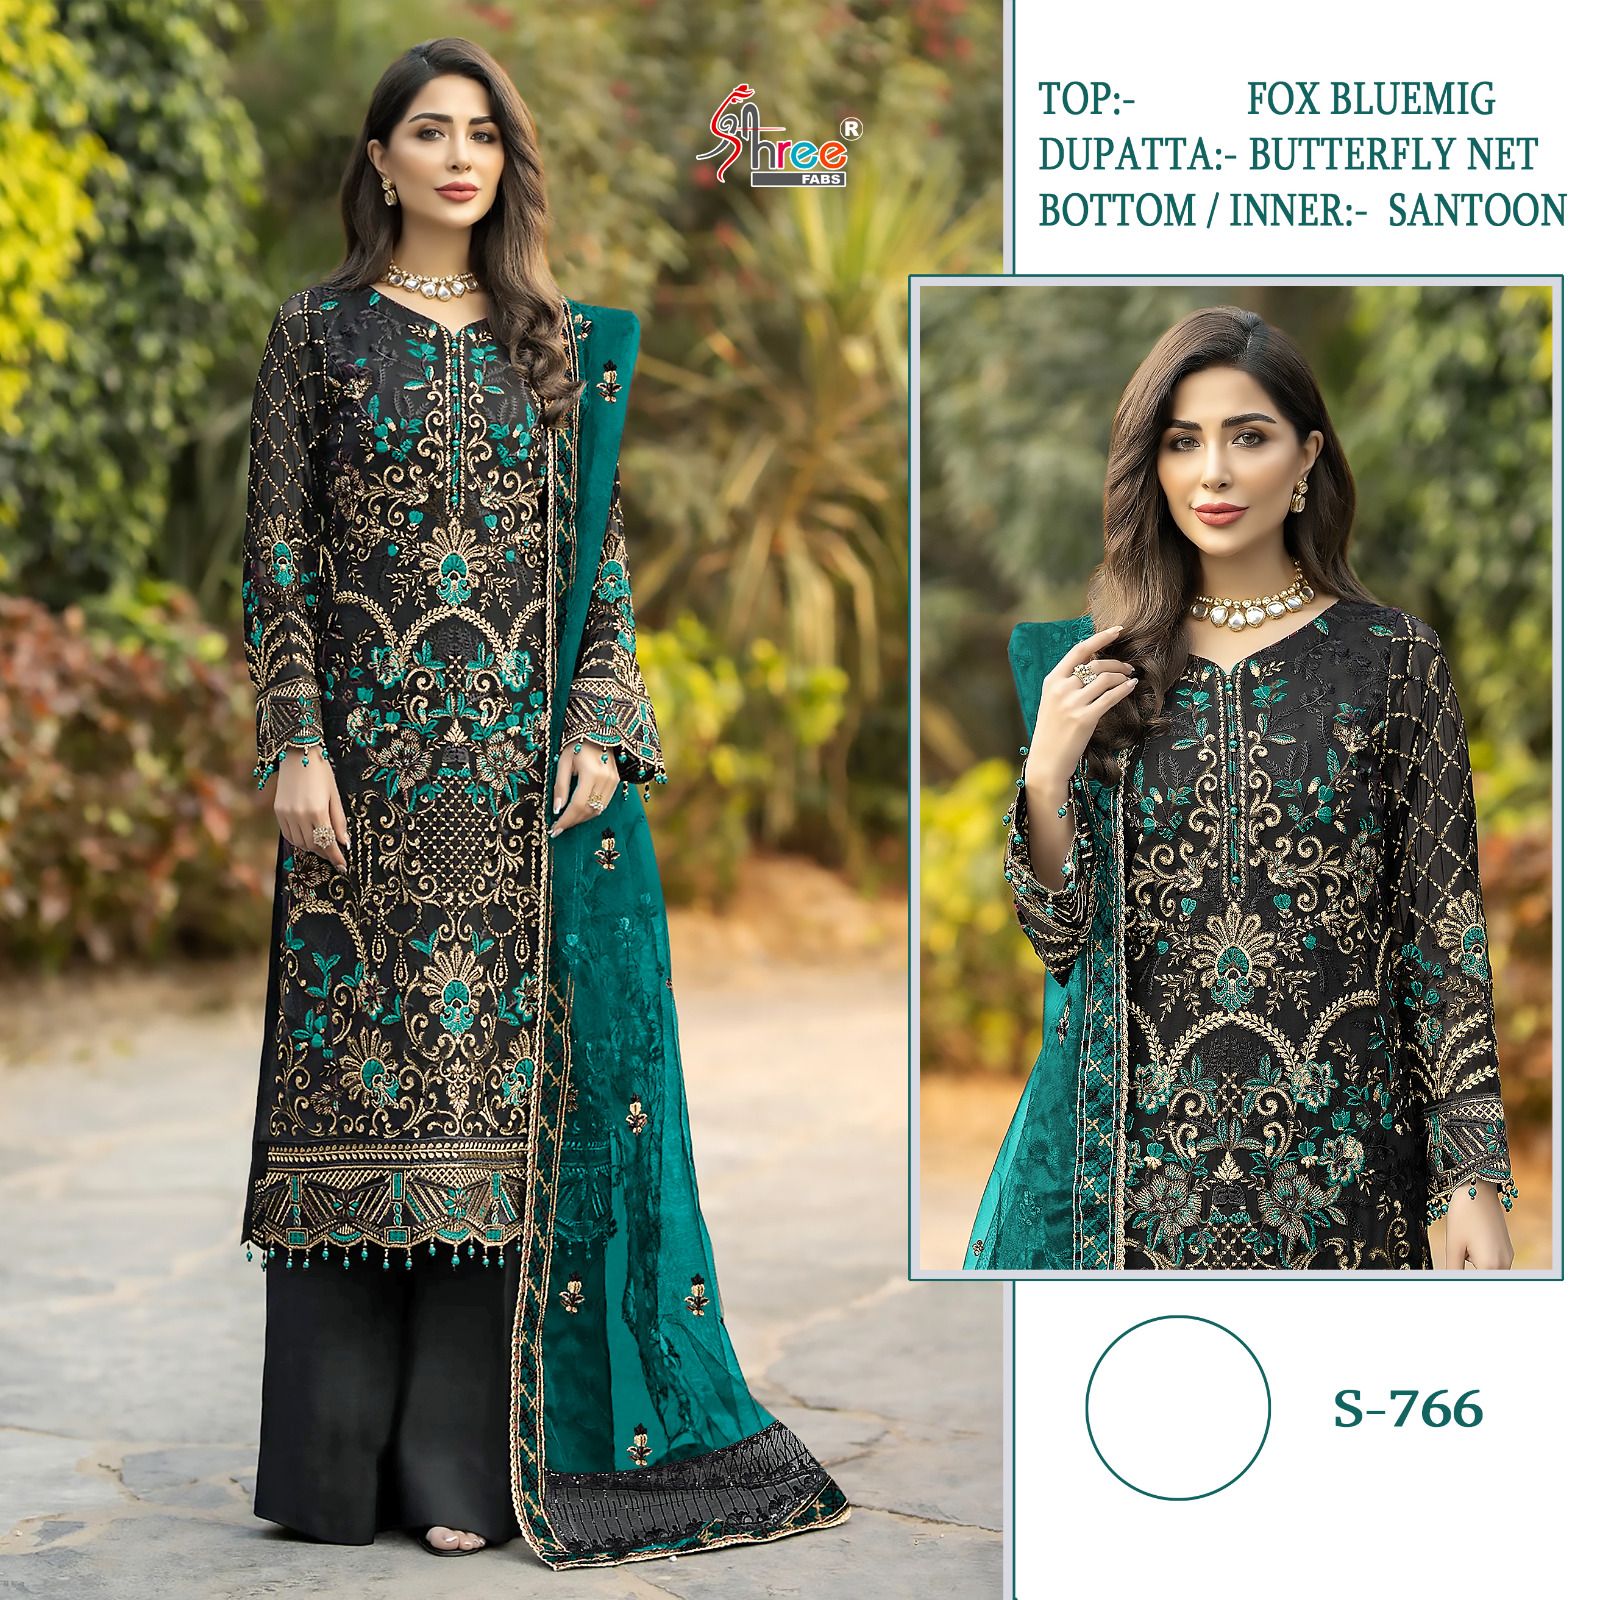 SHREE FABS S 766 PAKISTANI SUITS IN INDIA